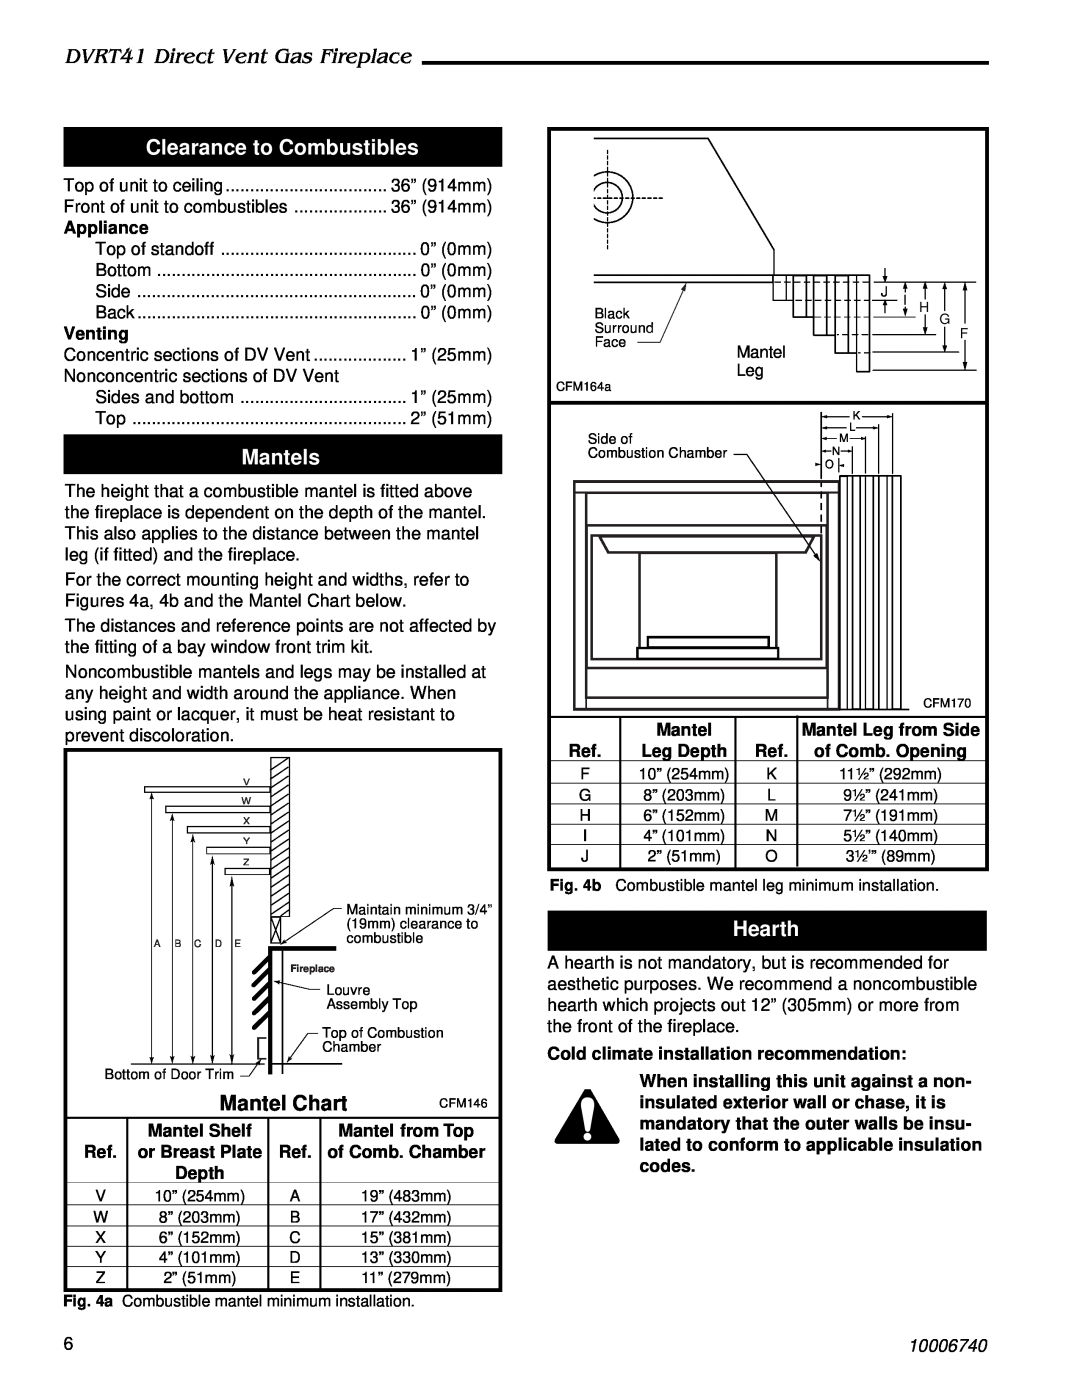 Vermont Casting manual Clearance to Combustibles, Mantels, Hearth, DVRT41 Direct Vent Gas Fireplace, 10006740 